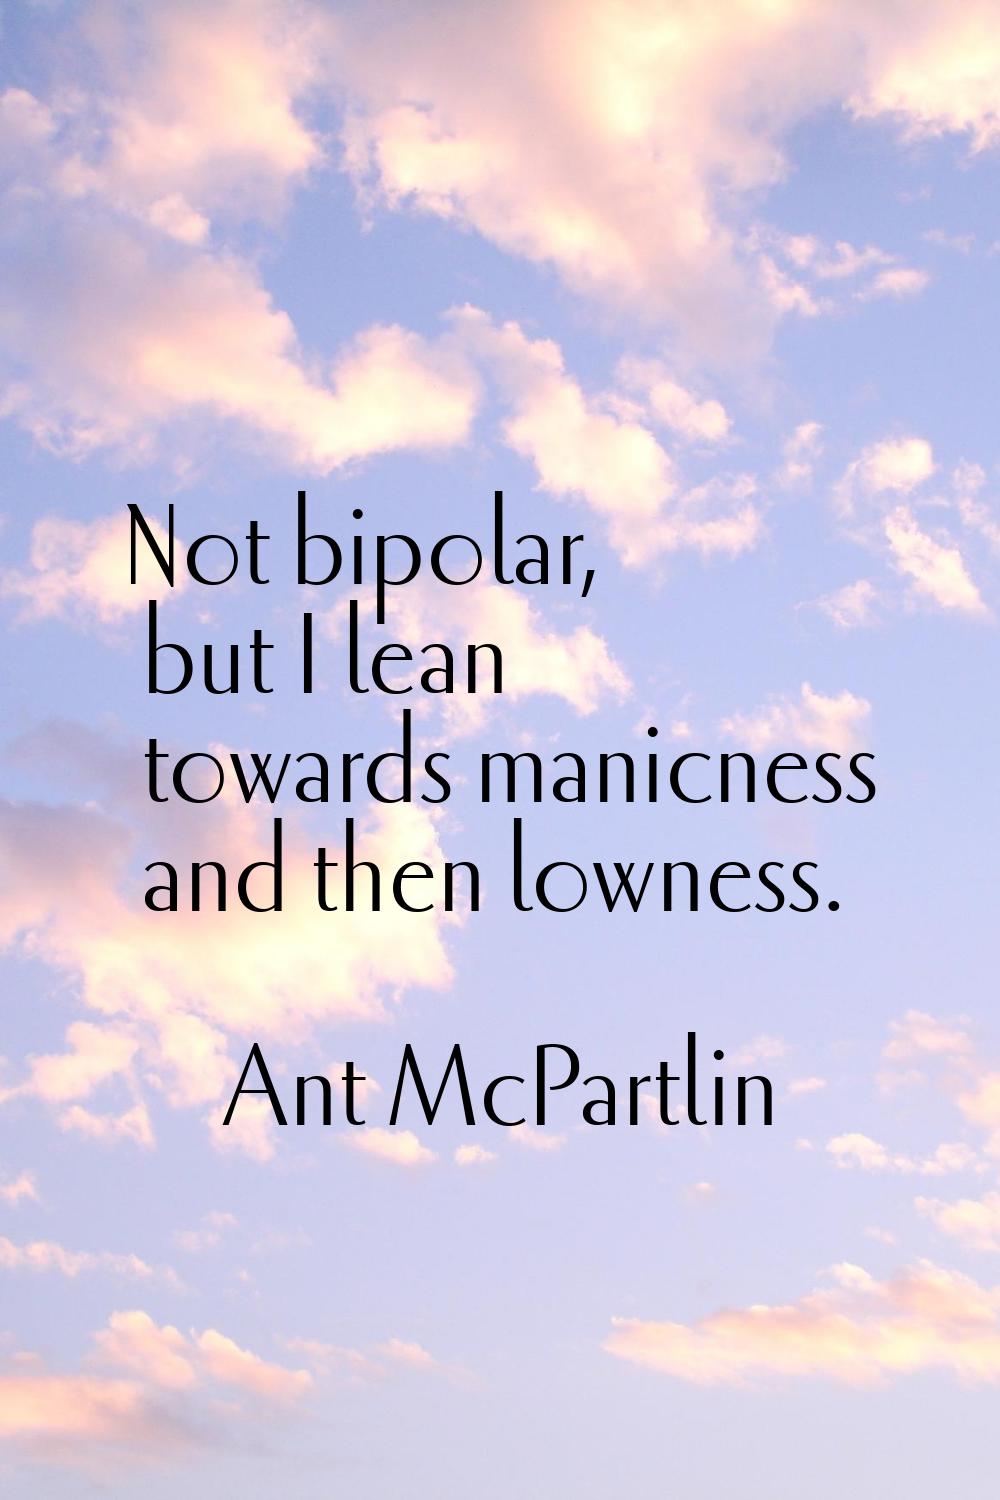 Not bipolar, but I lean towards manicness and then lowness.